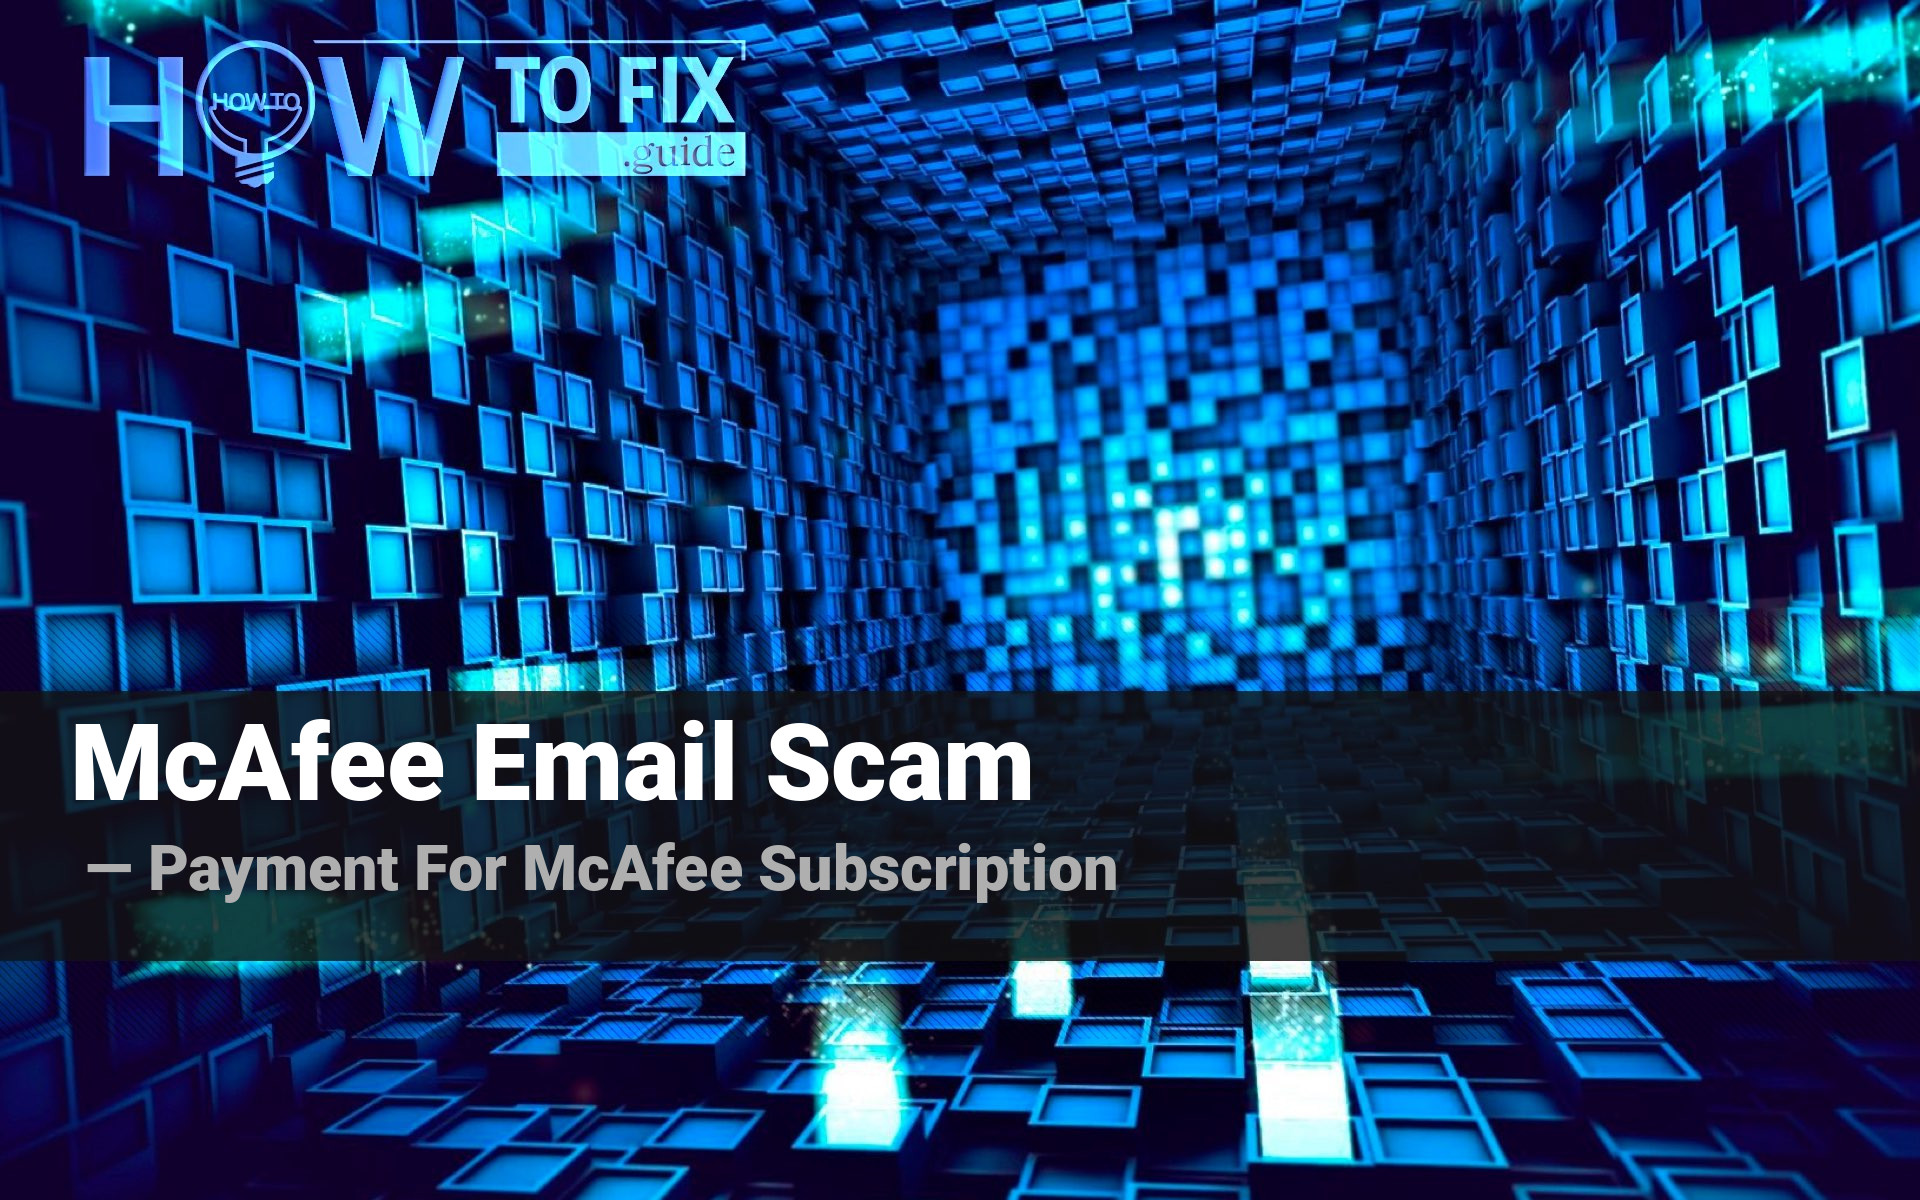 What is "Payment For McAfee Subscription" email scam?